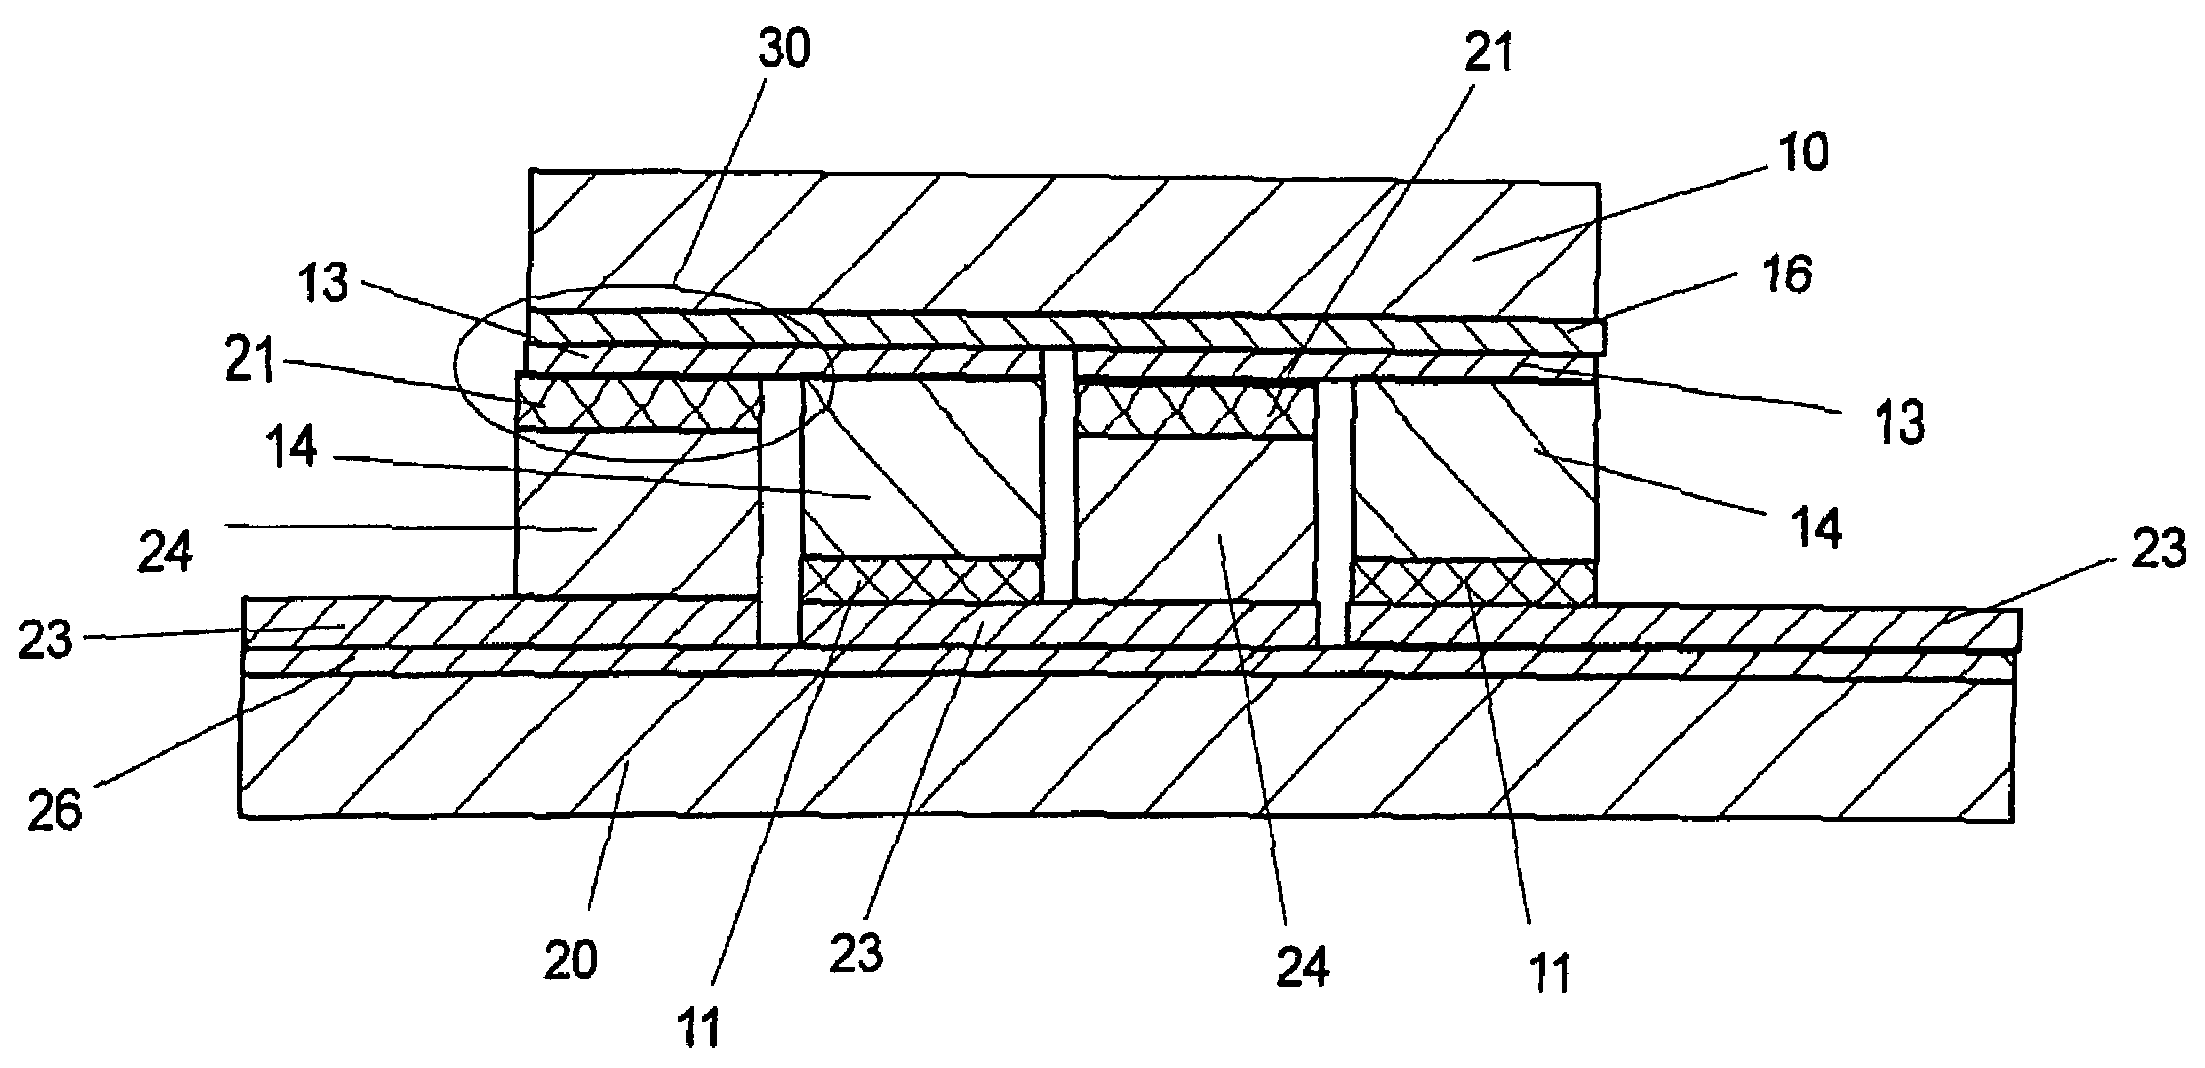 Solder, microelectromechanical component and device, and a process for producing a component or device